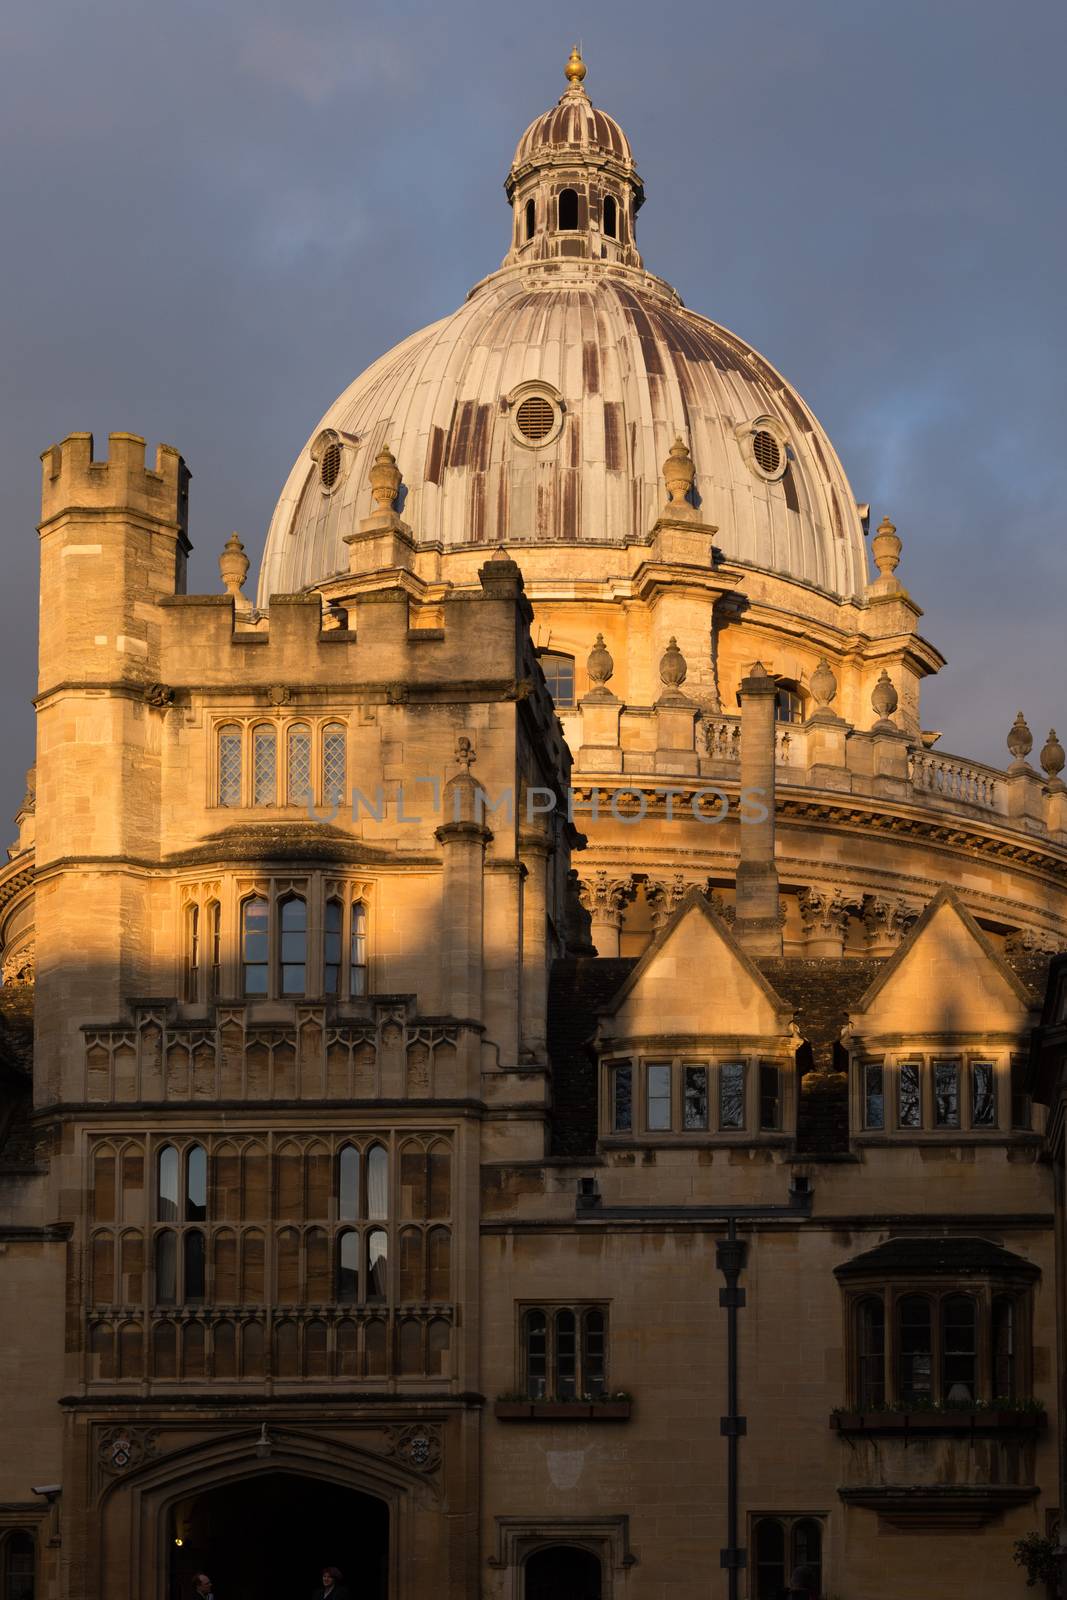 Oxford, Radcliffe Camera UK August 12th 2018 by kgboxford